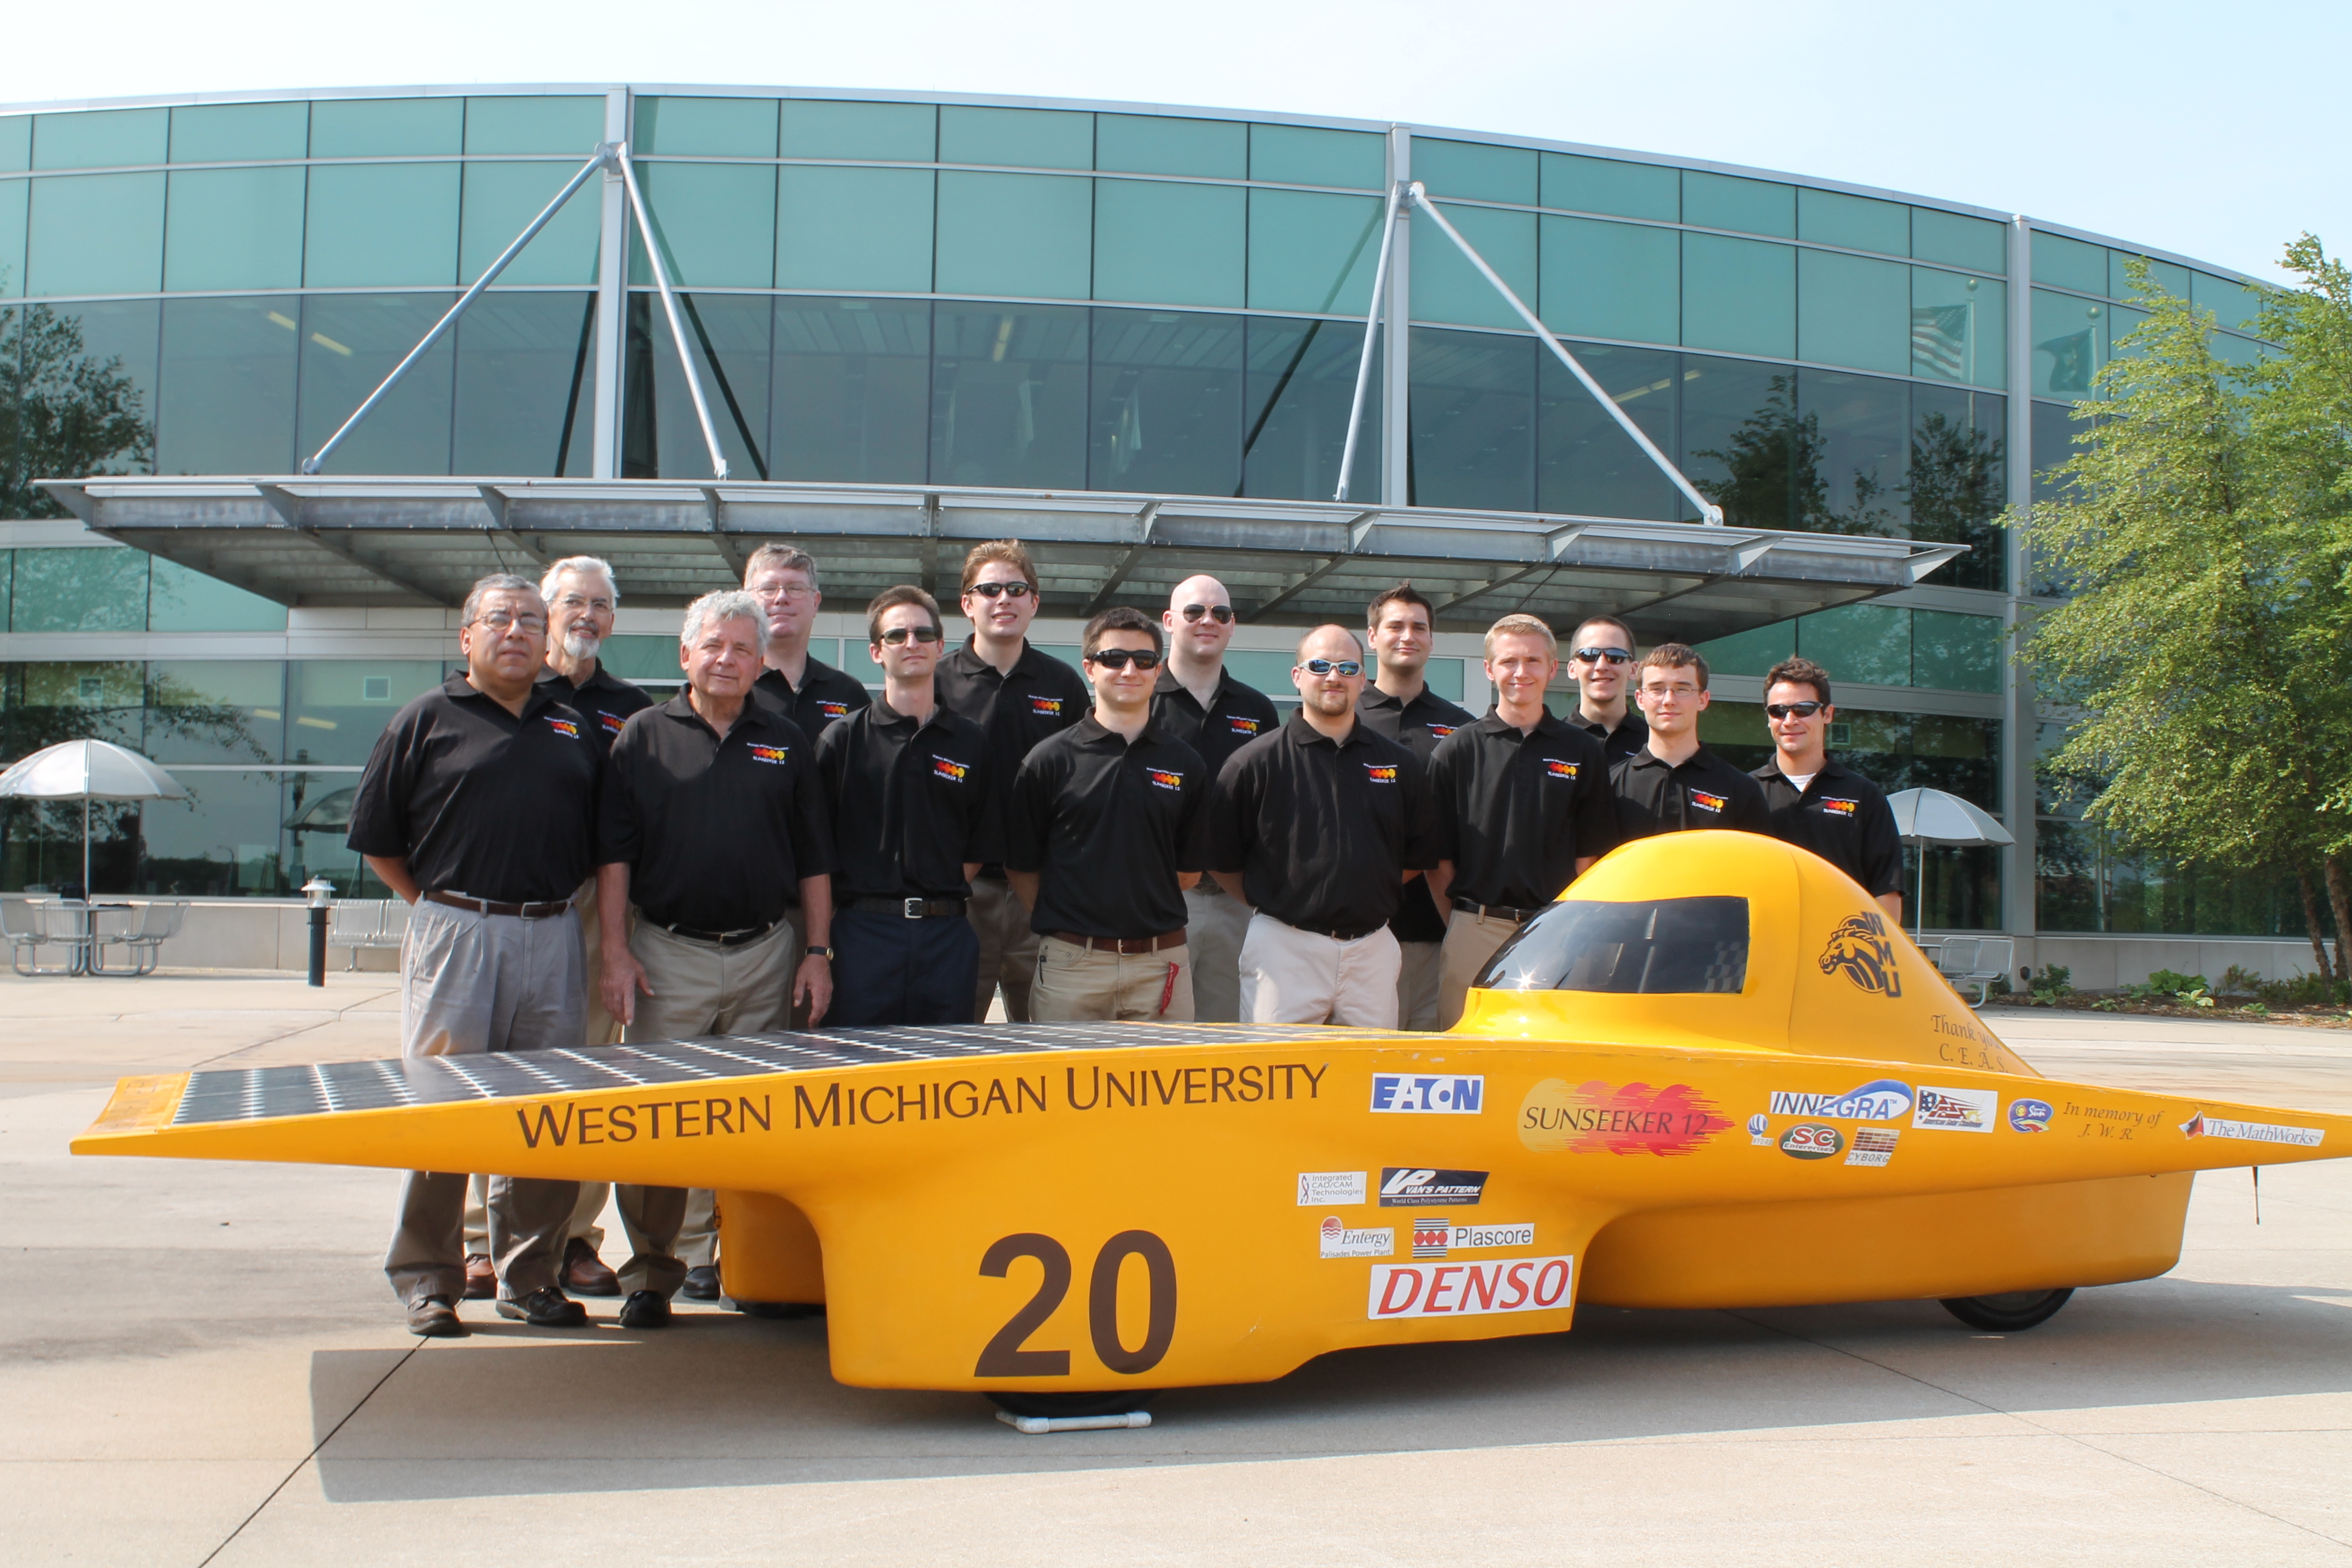 Eaton Sponsors Western Michigan University Student Race Car Teams to Help  Develop Engineering and Technical Skills | Business Wire